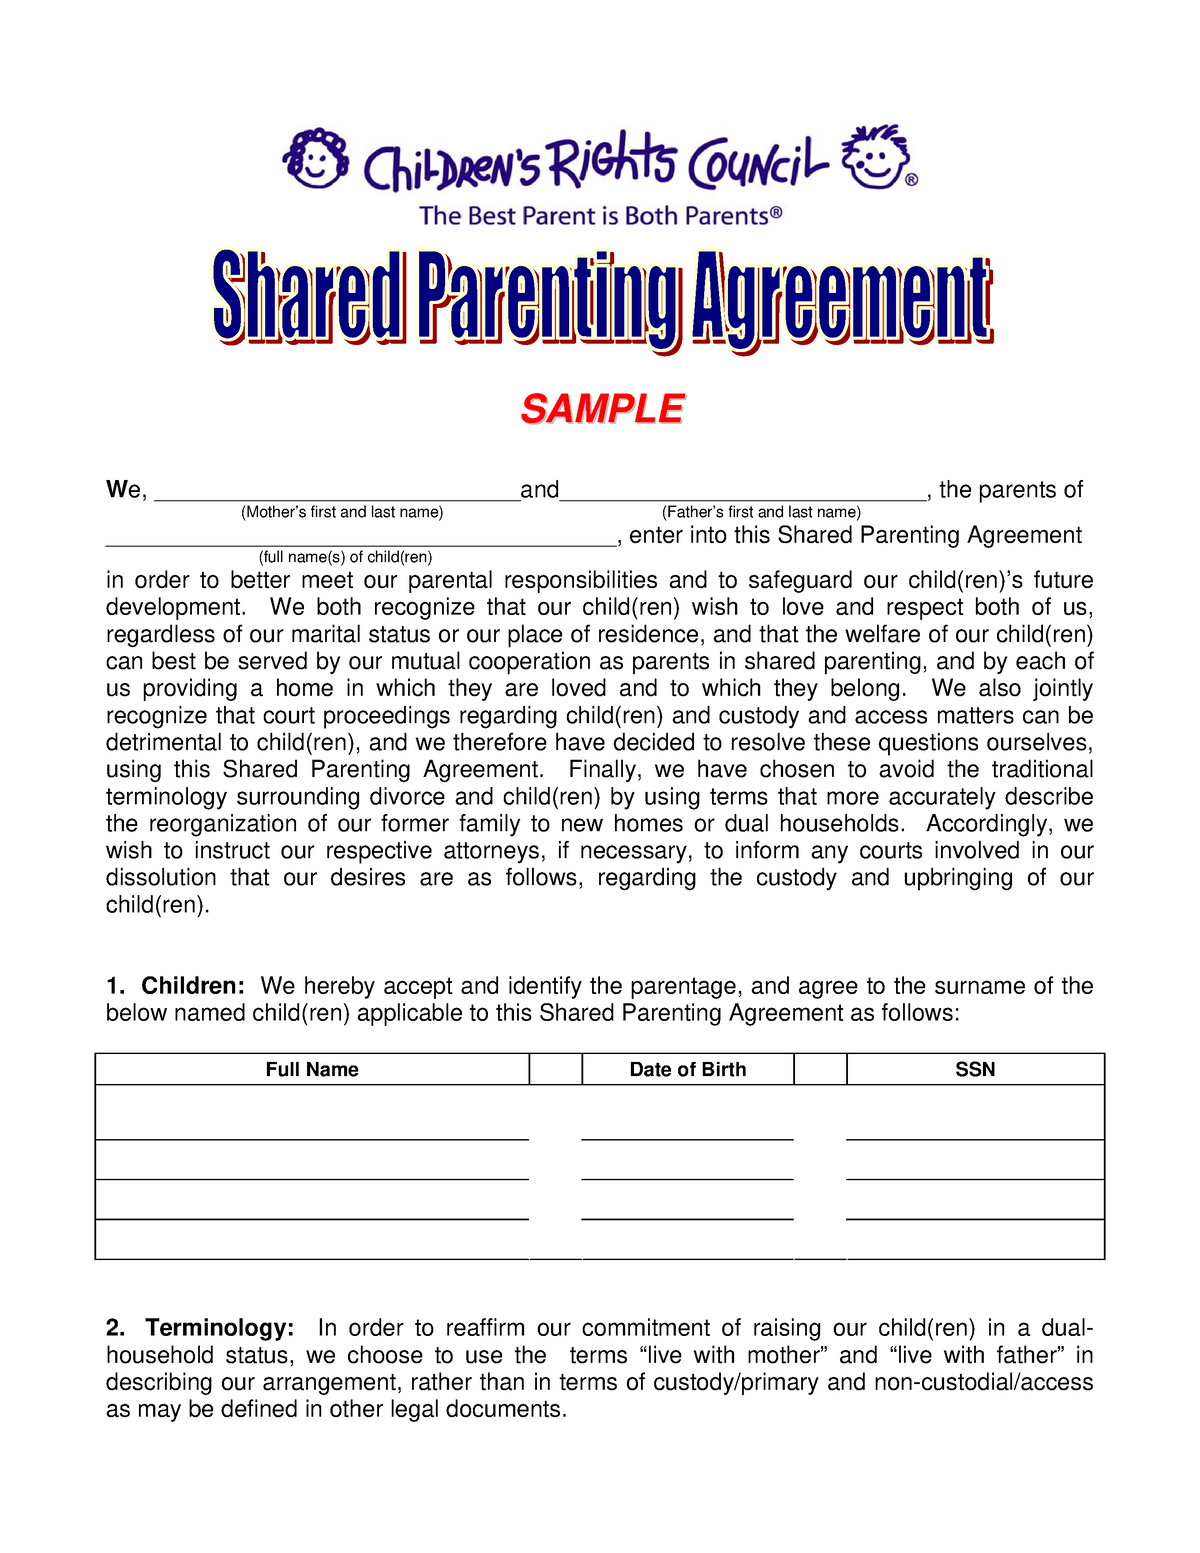 Parenting Agreement Childcare agreement form assignment